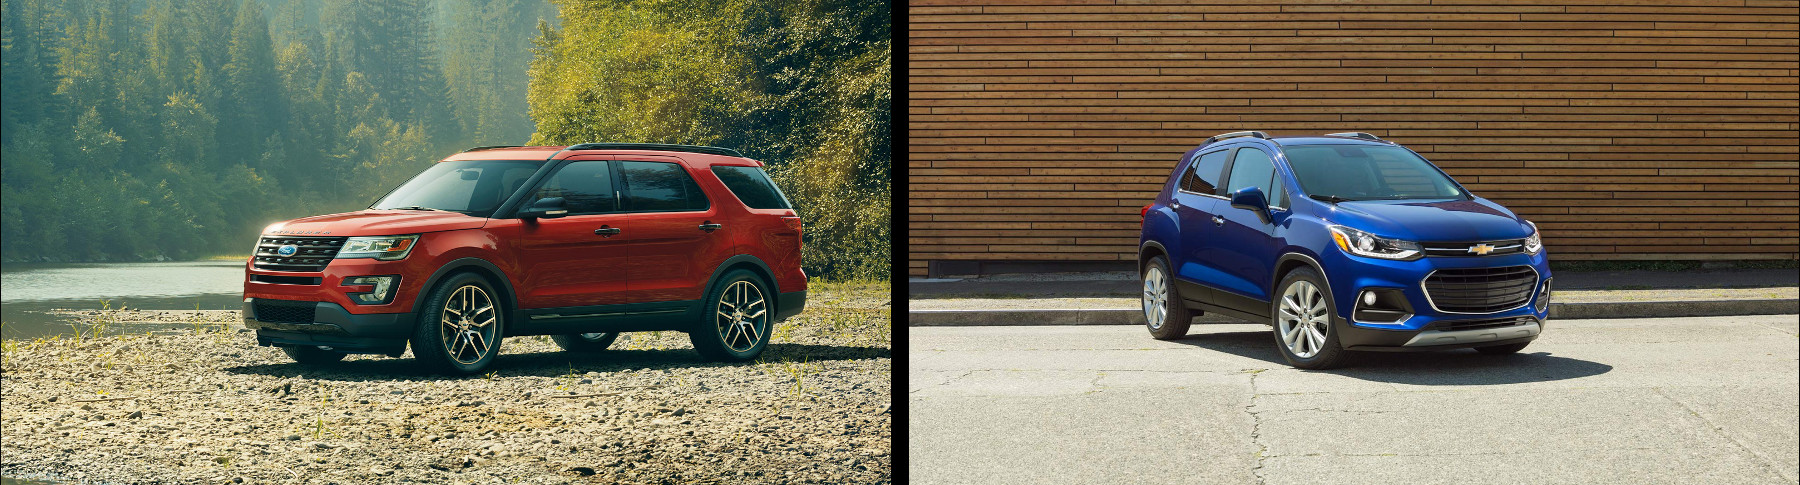 Crossover vs. SUV: Yes, There Is a Difference